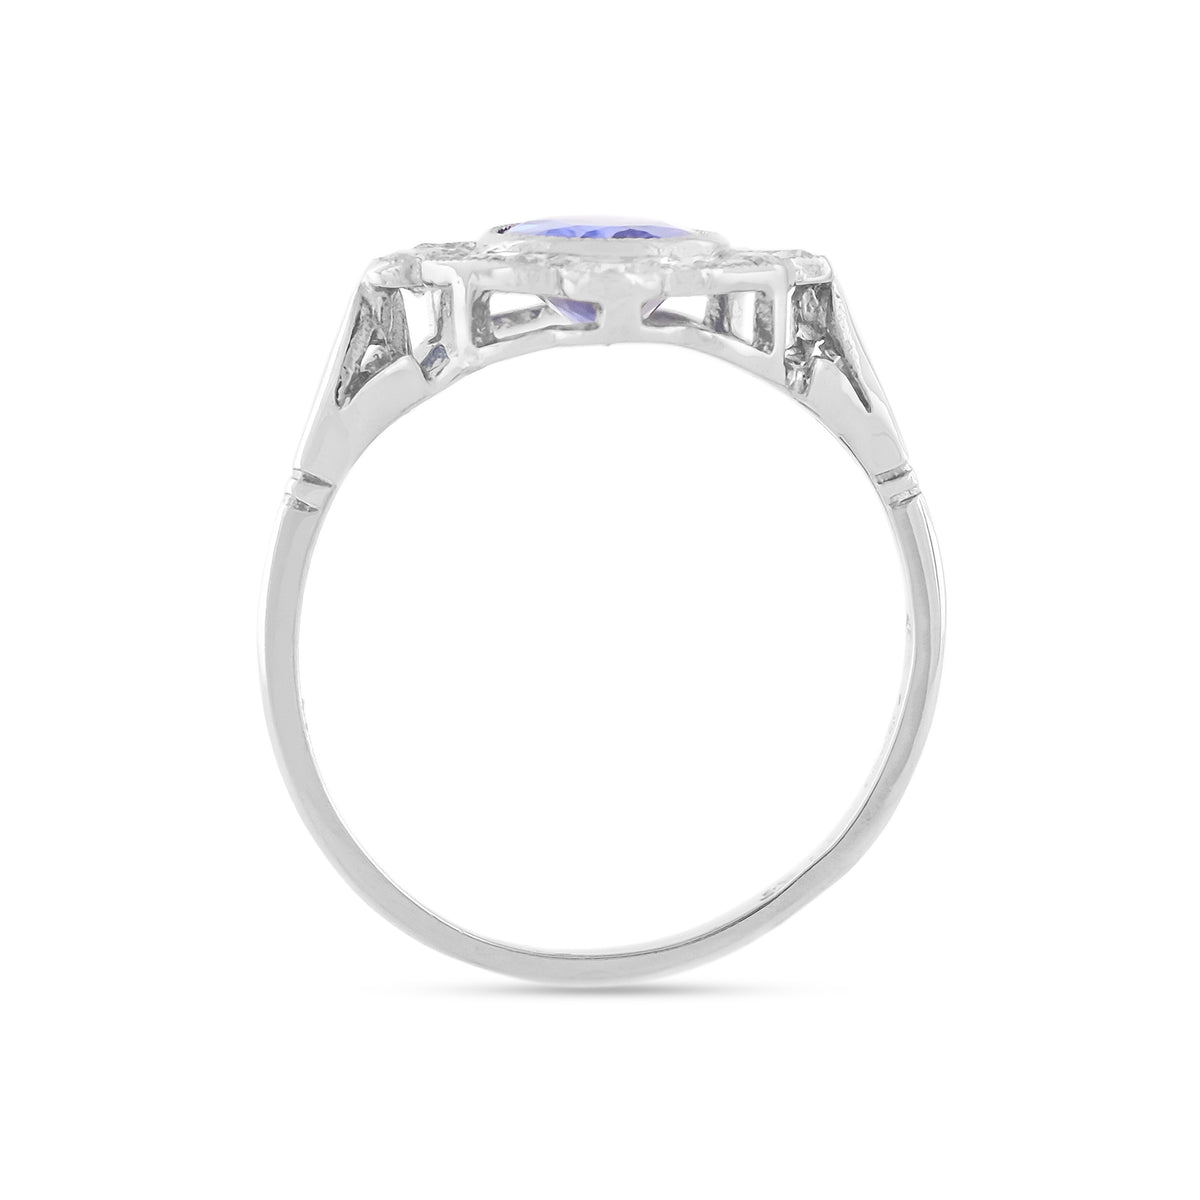 Vintage 18ct White Gold Tanzanite and Diamond Cluster Ring